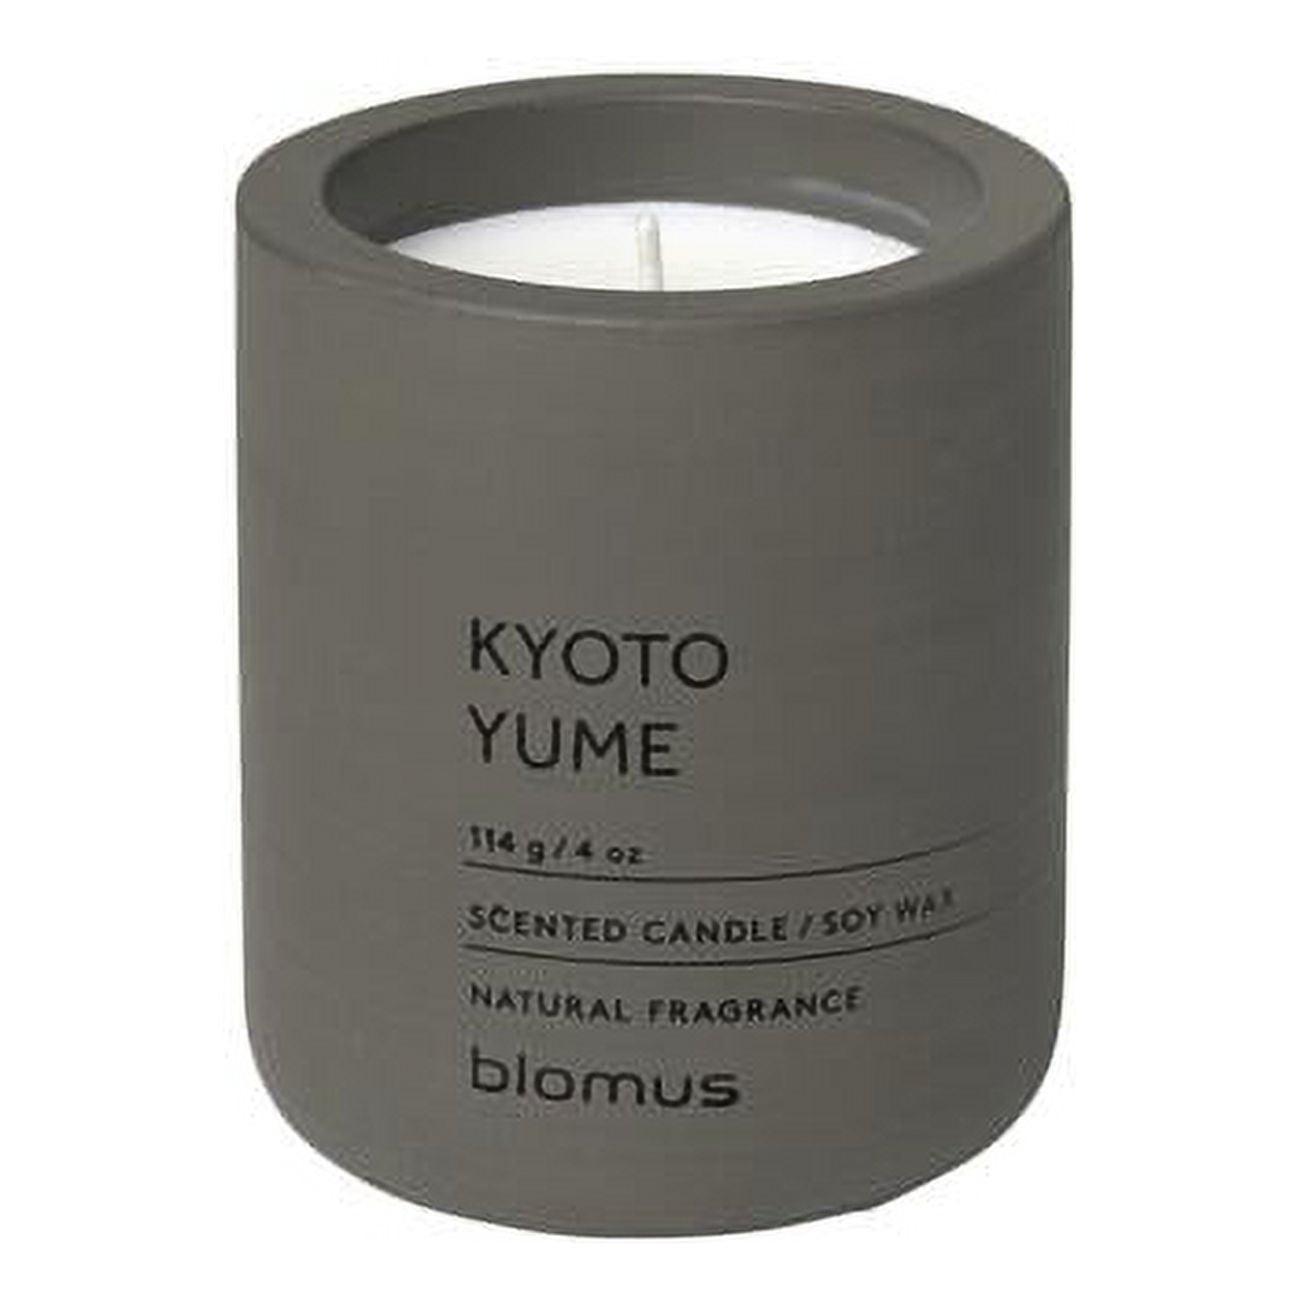 Kyoto Yume 4 oz White Lavender Soy Scented Jar Candle